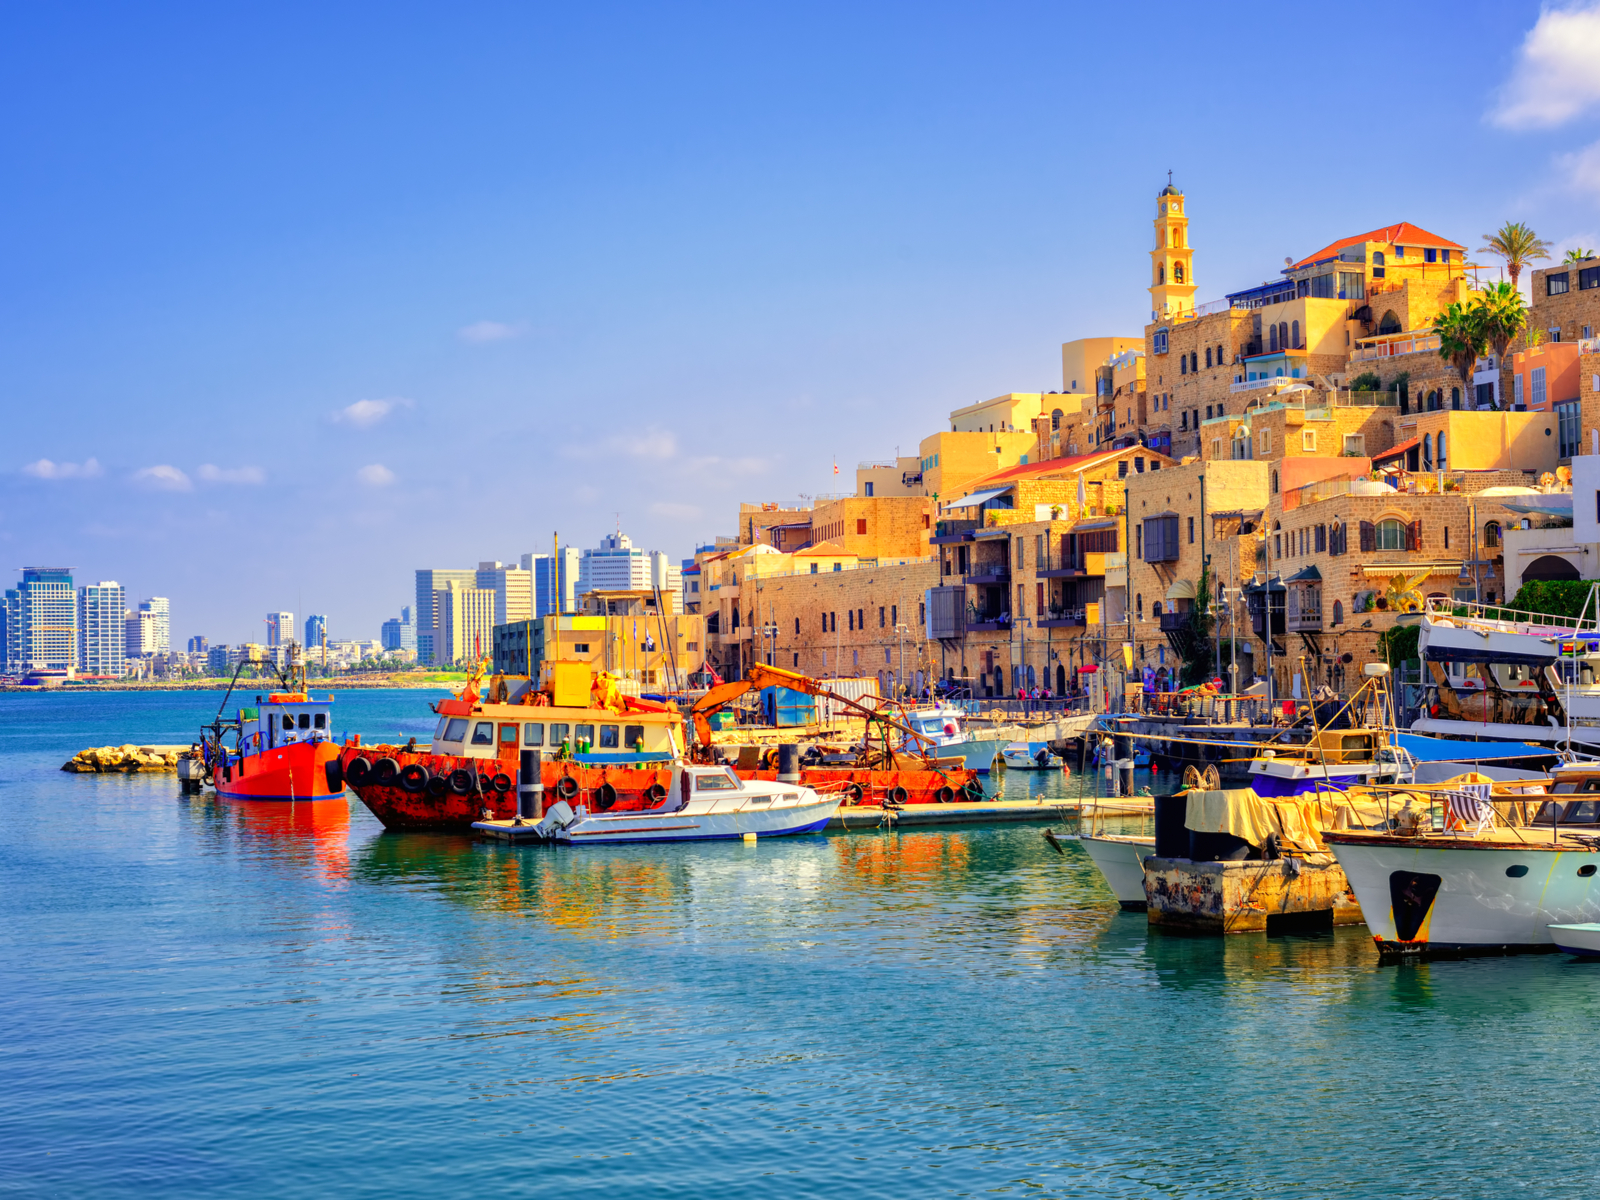 Old town and city of Jaffa in Tel Aviv pictured during the overall best time to visit Israel